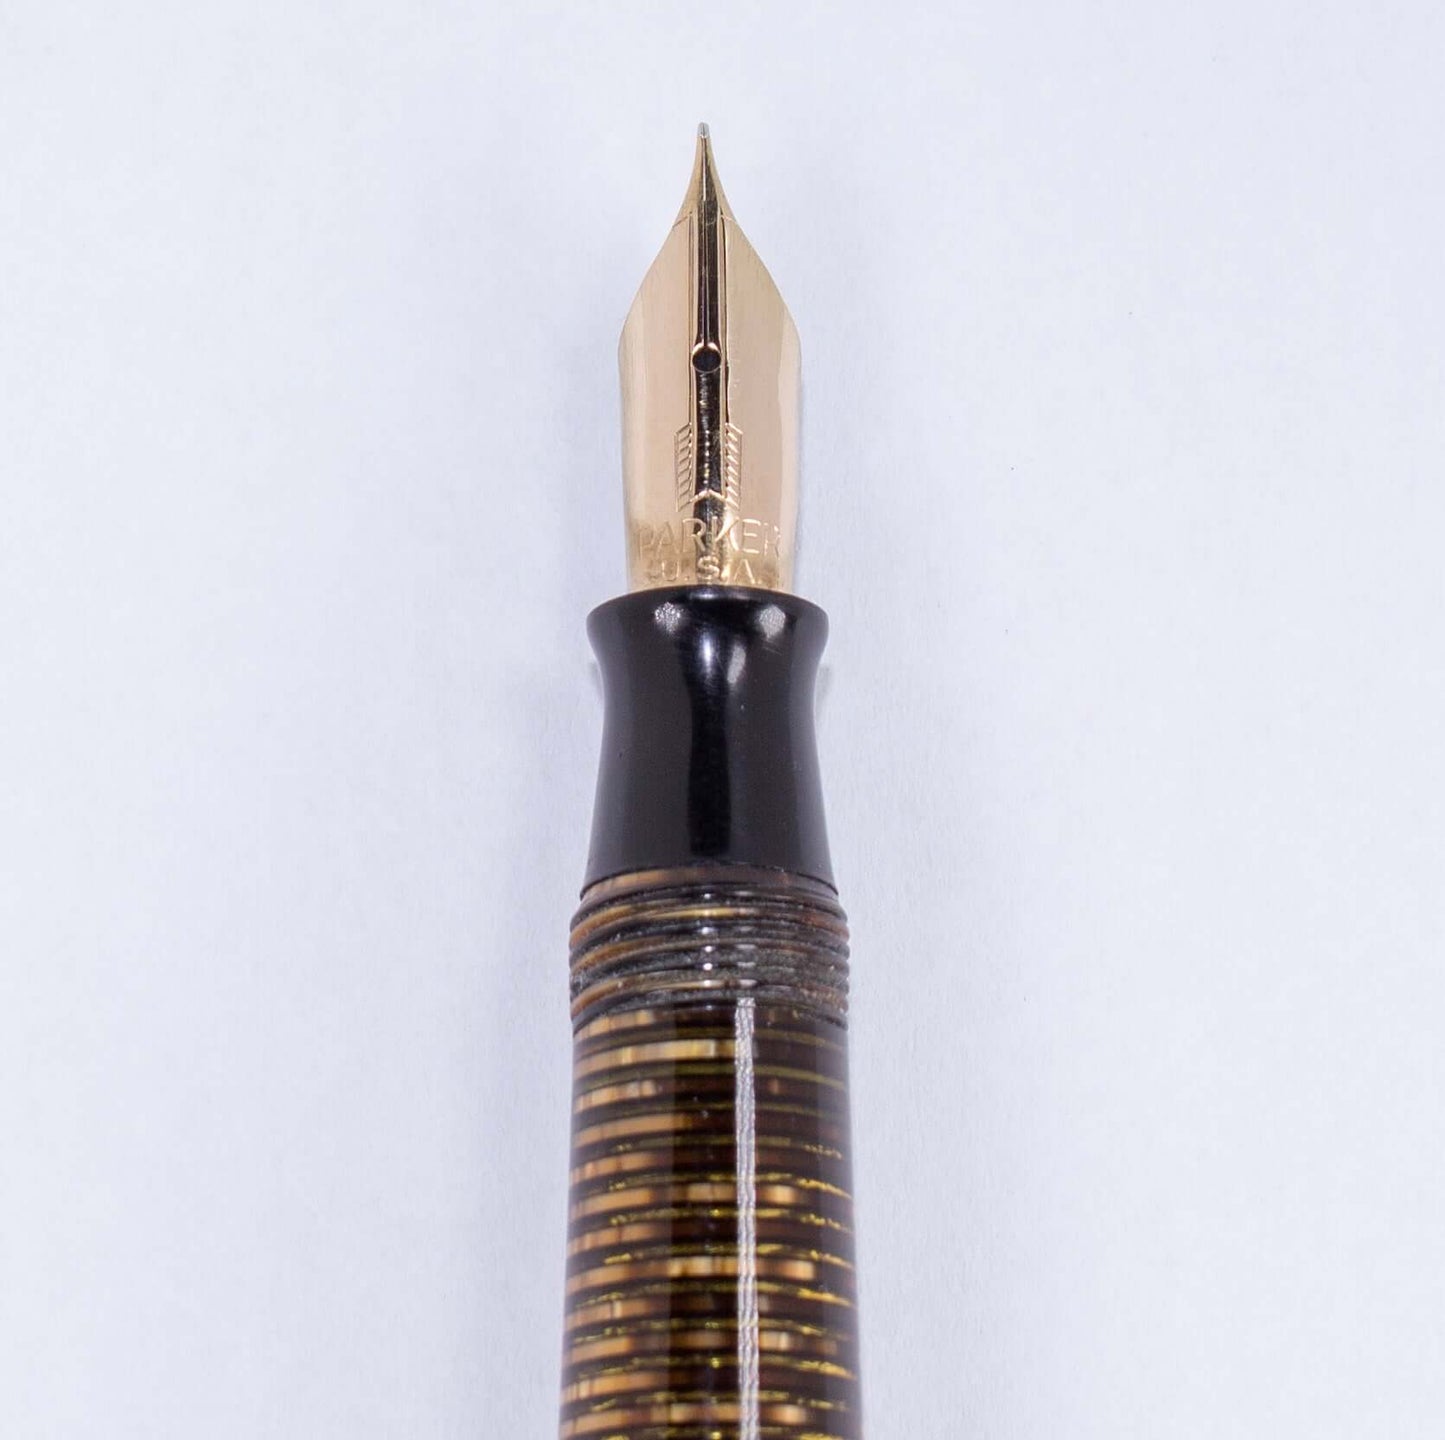 Parker Vacumatic Debutante Vintage Fountain Pen, Golden Pearl, 14K Fine Nib.Name/Type: Parker Vacumatic Debutante Fountain Pen, 14K Fine Nib Manufacture Year: 1944 Length: 4 7/8 Filling System: Restored Vacumatic with plastic plunger Color/Pattern: Golden